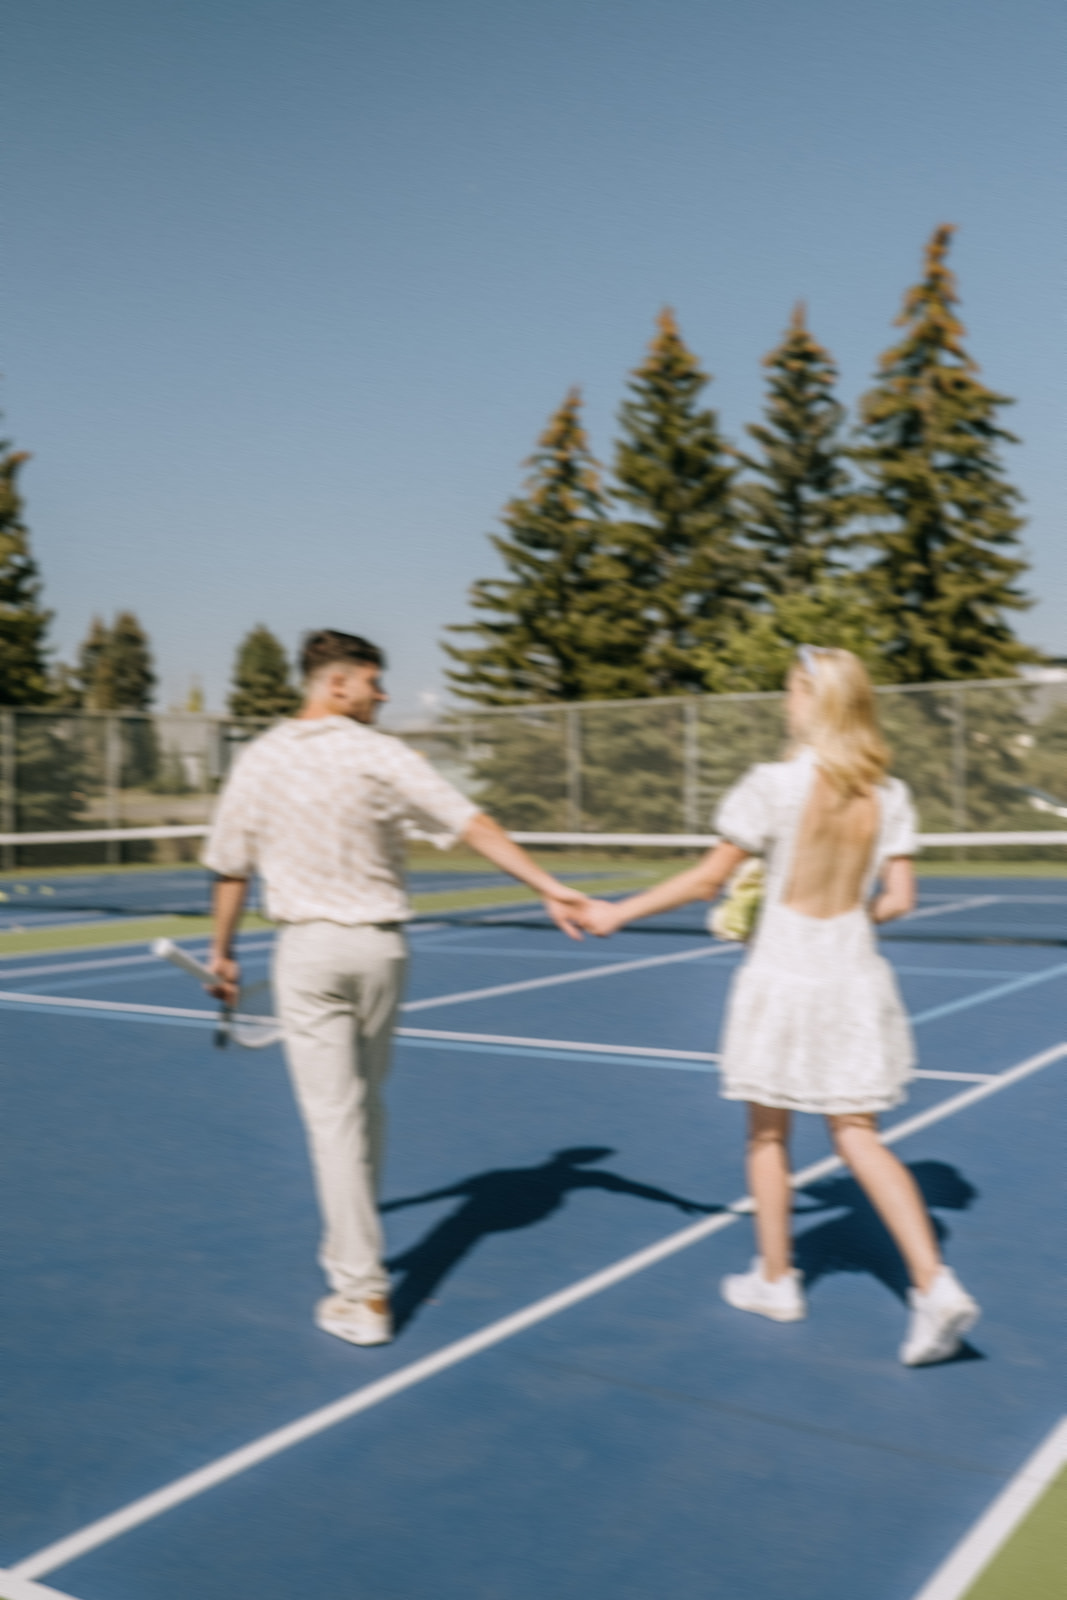 trendy blurred photography for outdoor couple's portraits, Tennis themed wedding ideas for the modern runaway bride, open-back short wedding dress worn with sneakers for a sporty bride